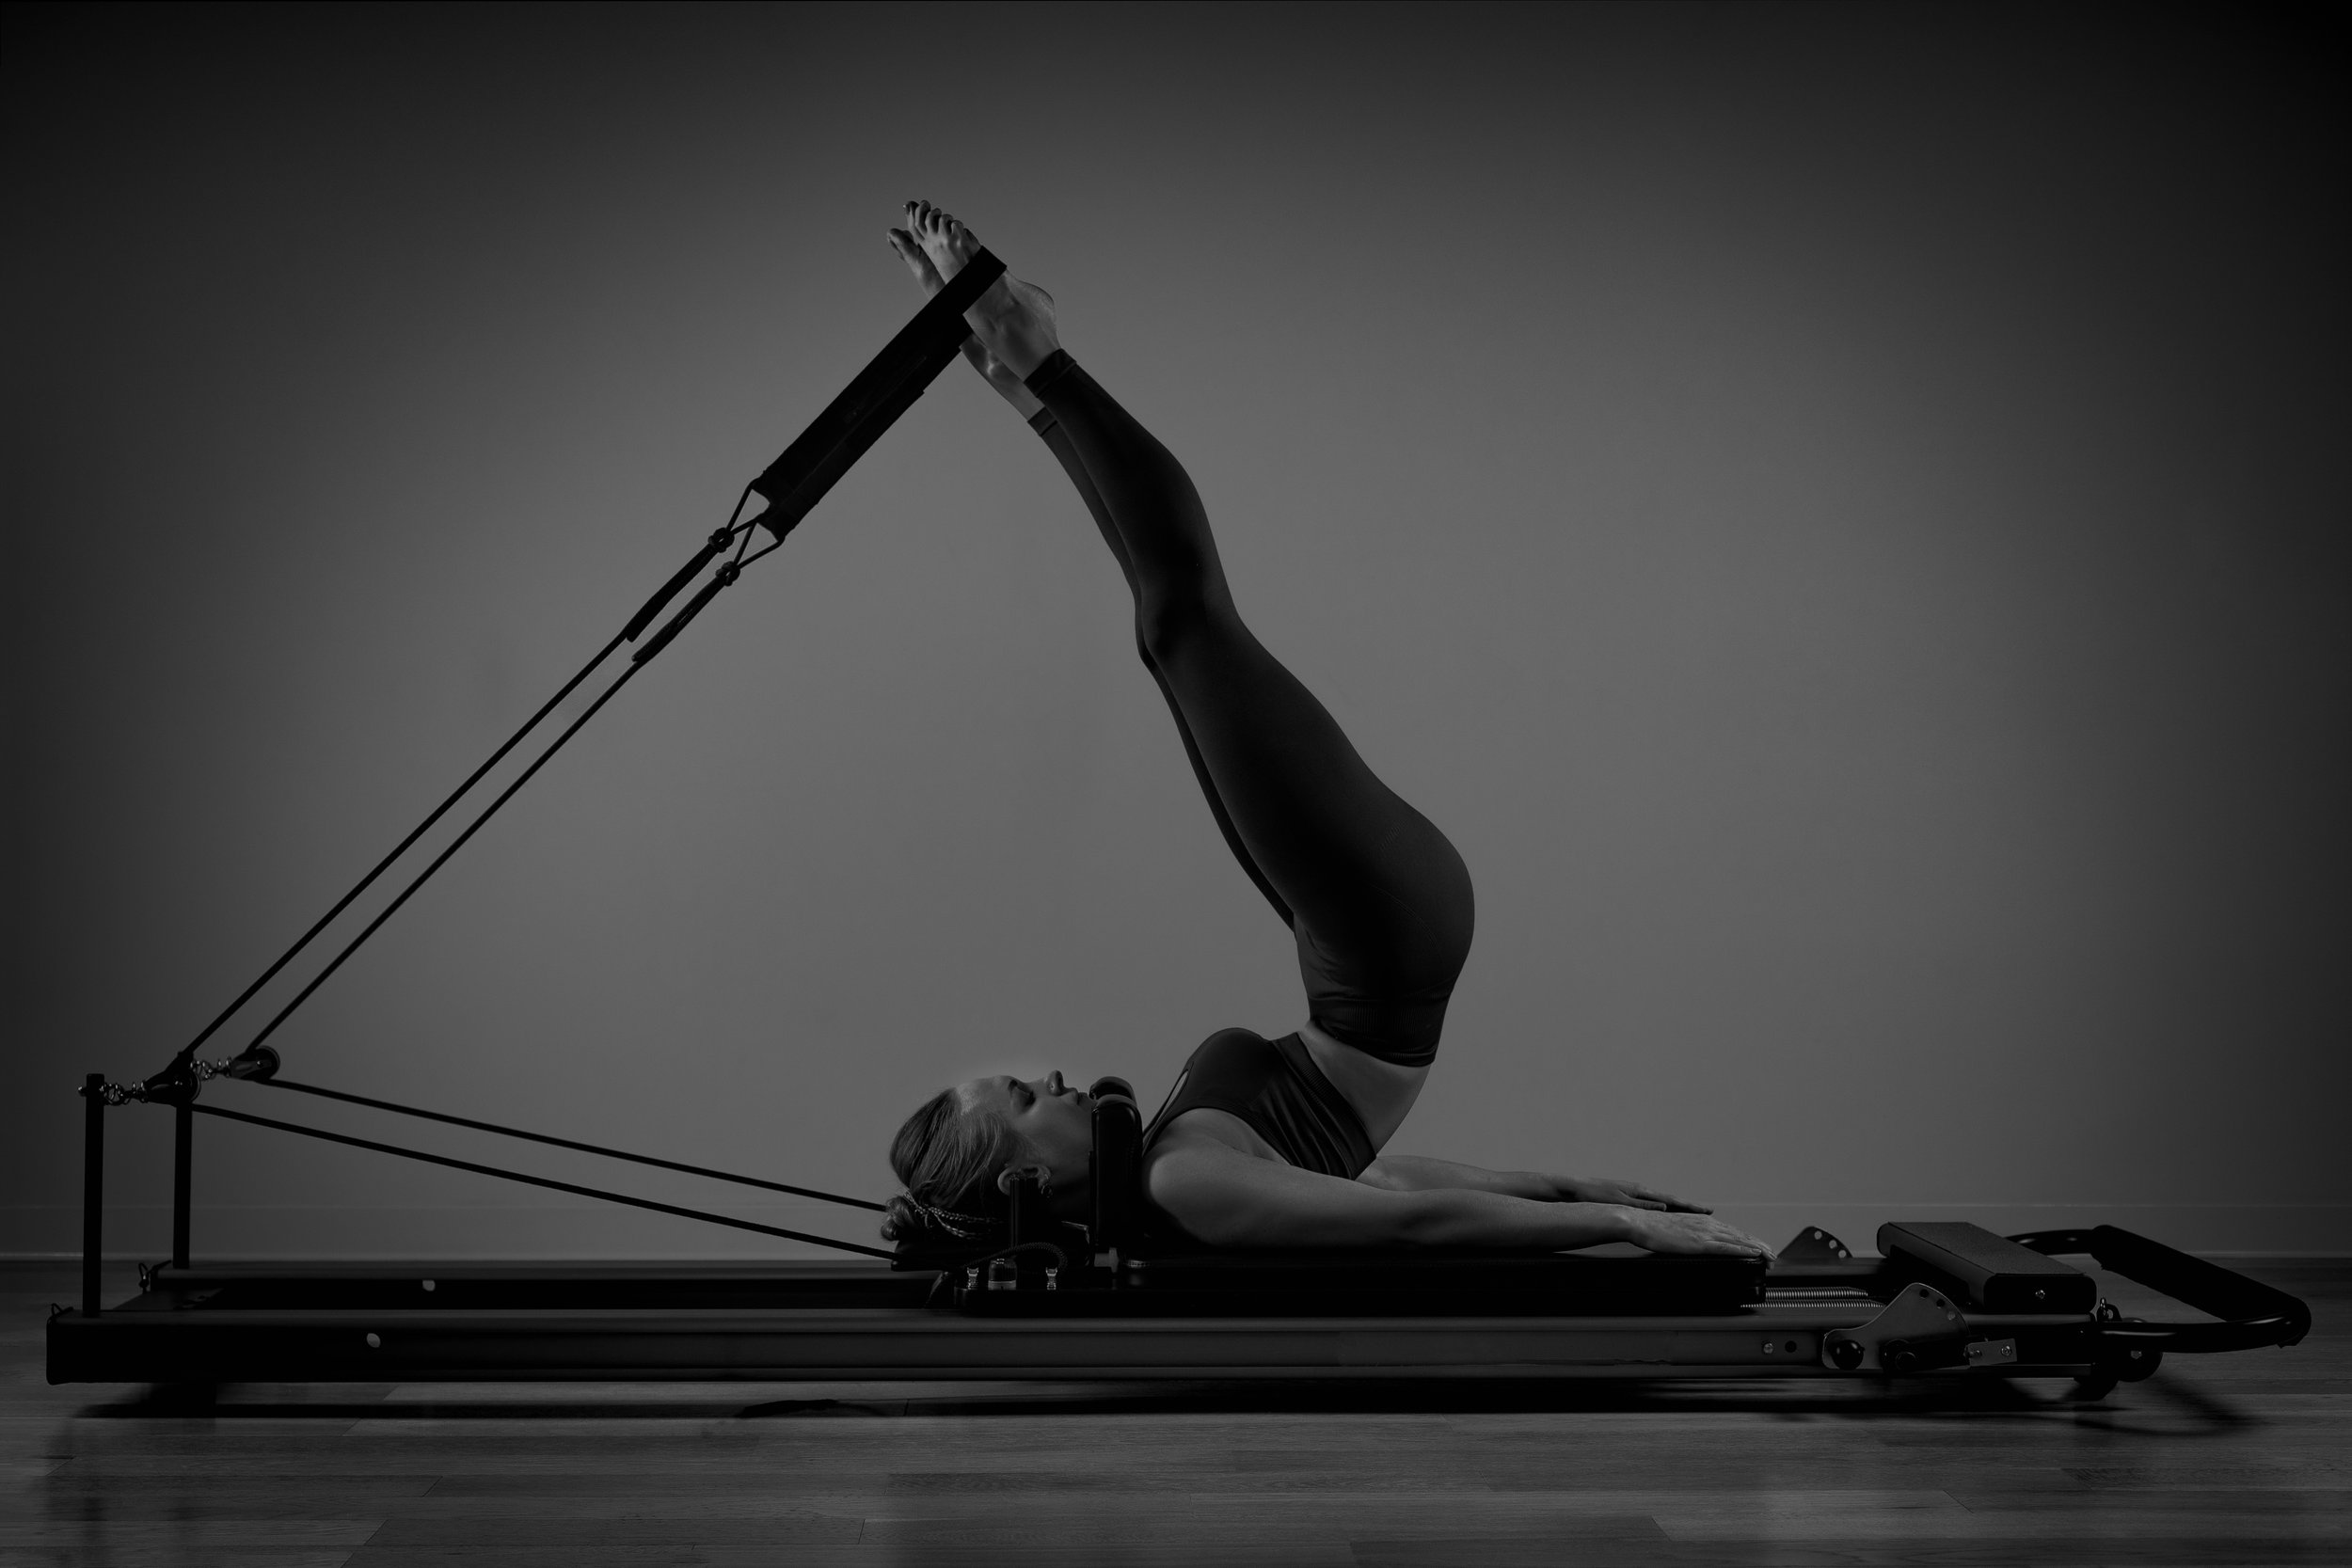  Reformers - Pilates: Sports & Outdoors